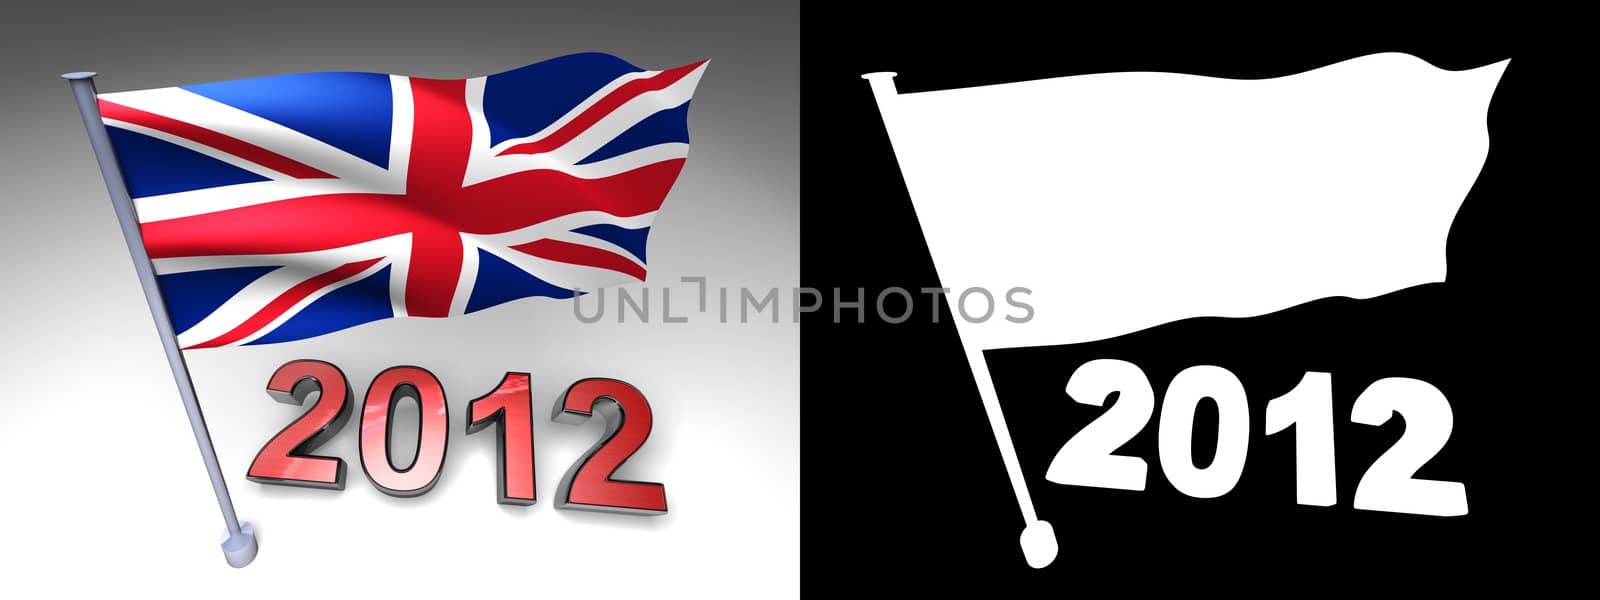 2012 design and Britain flag on a pole by shkyo30